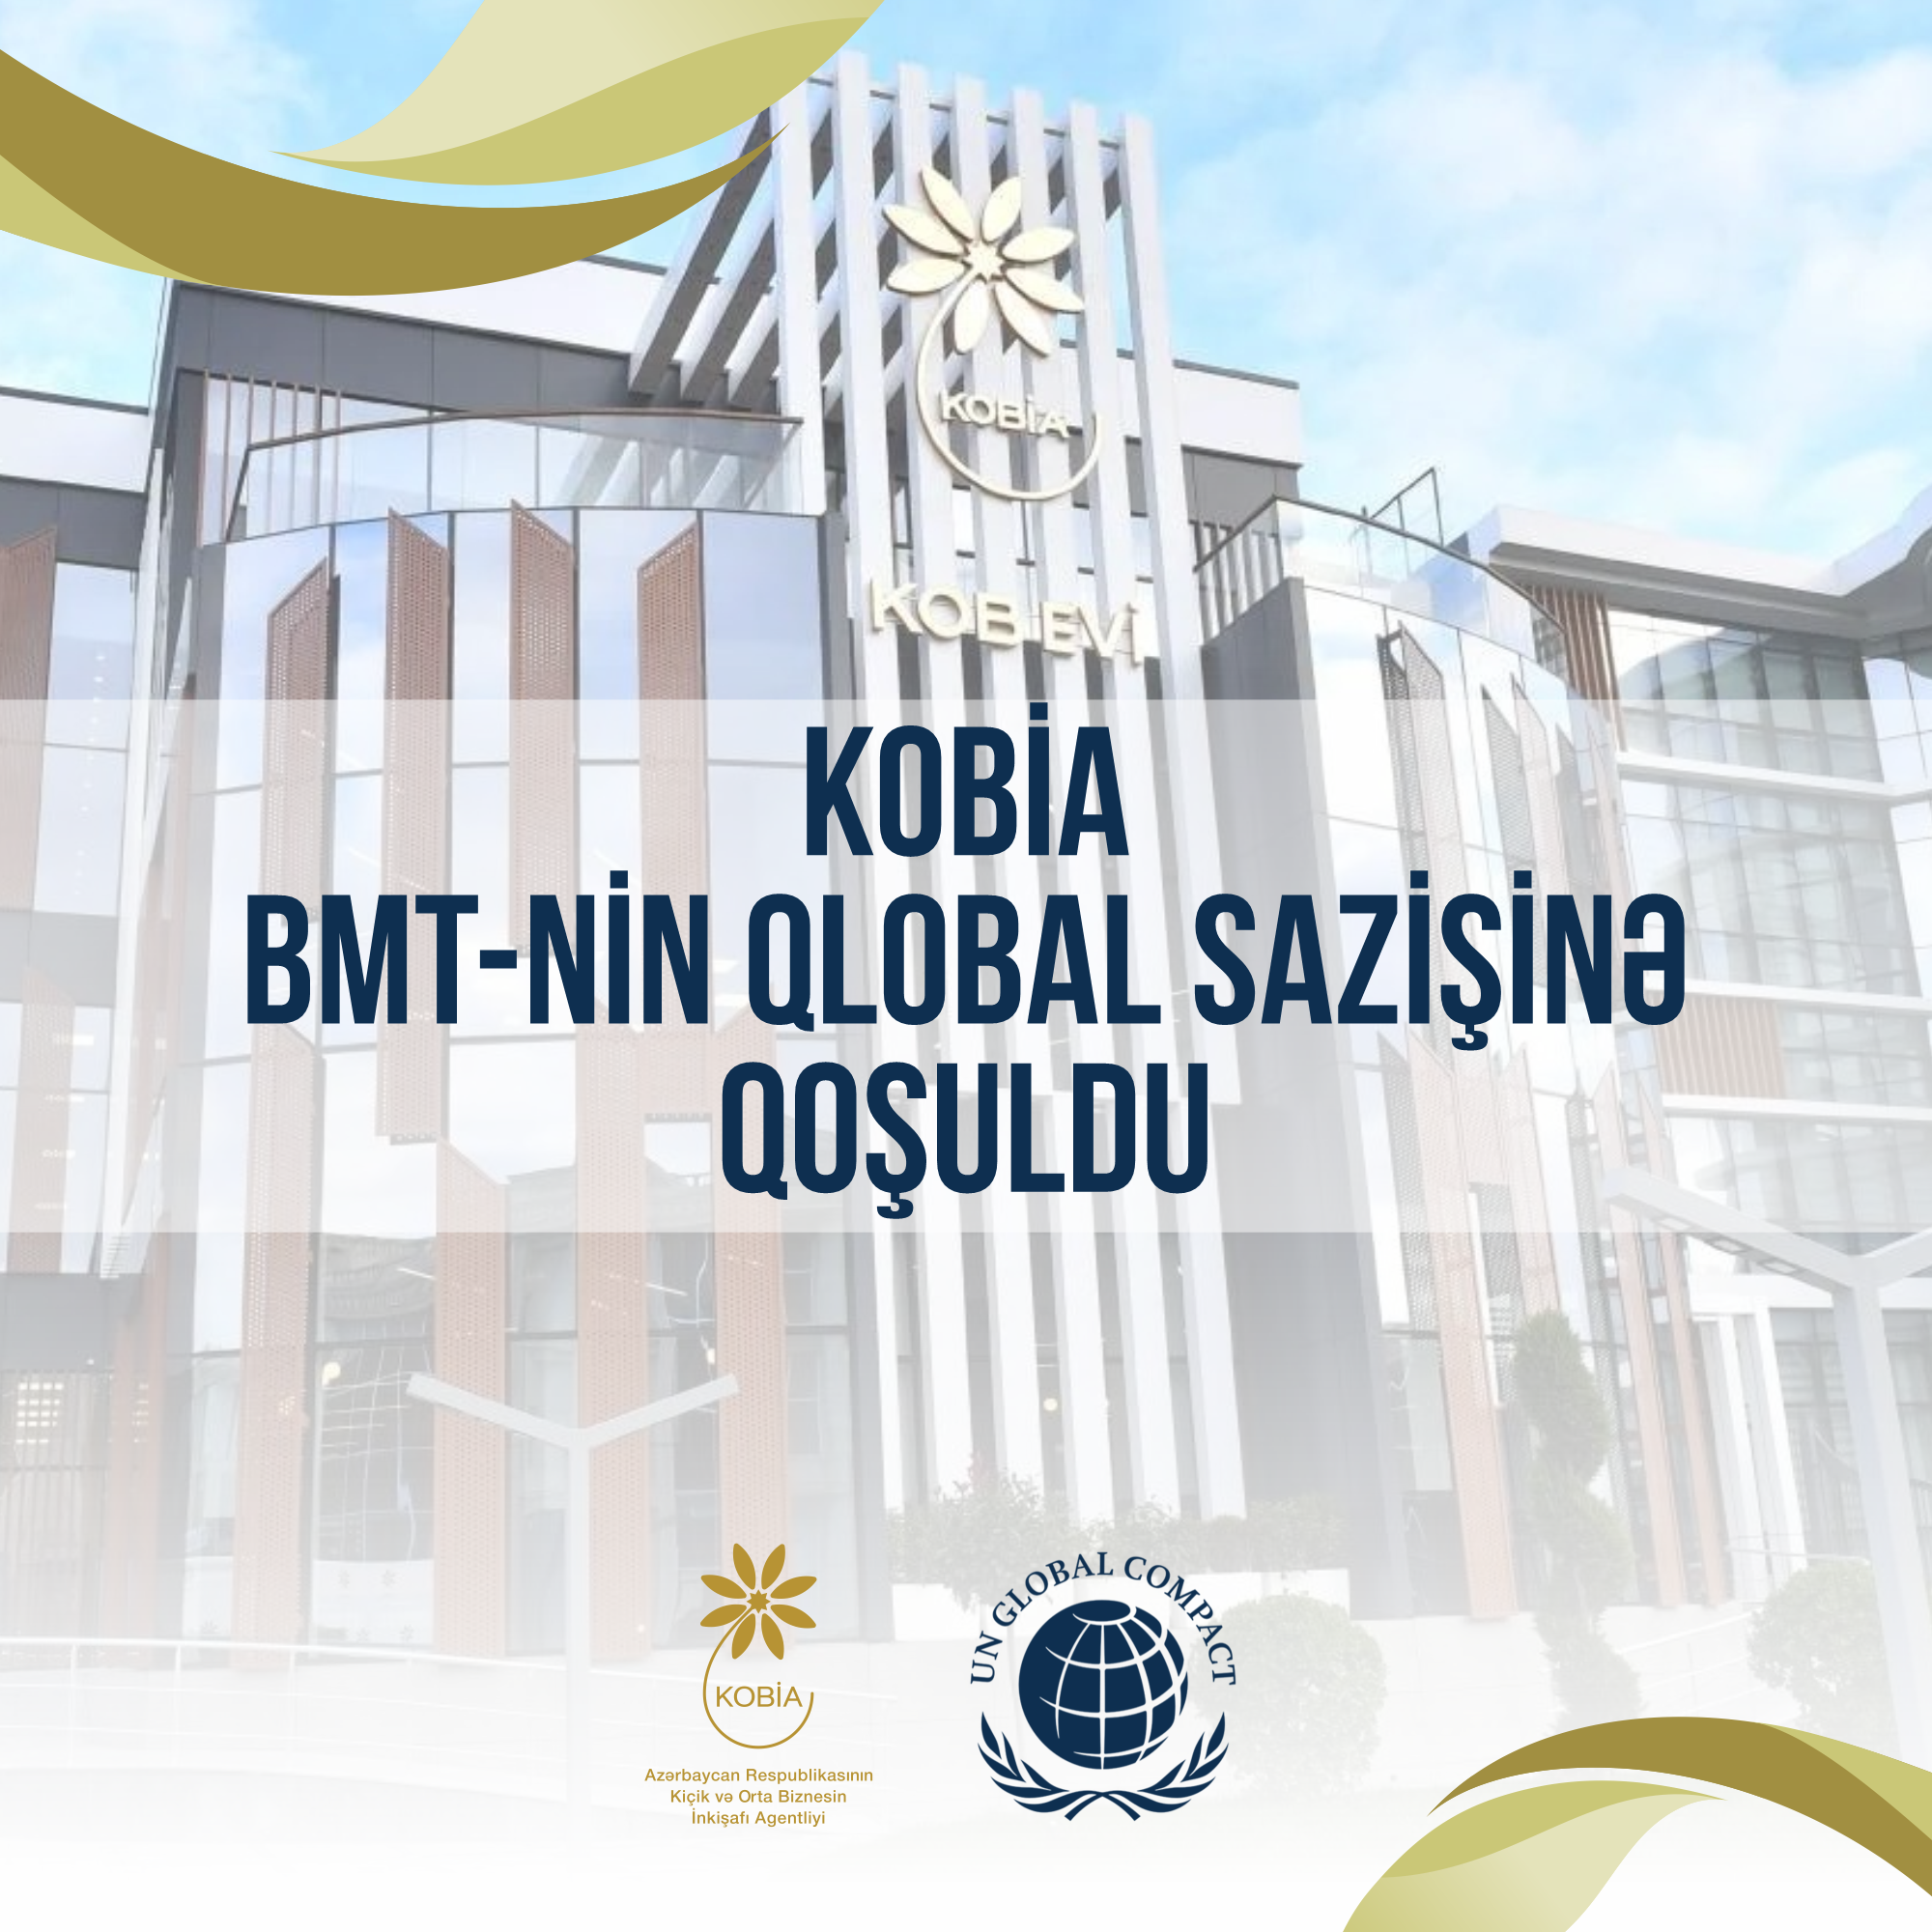 KOBİA joins the UN Global Compact 